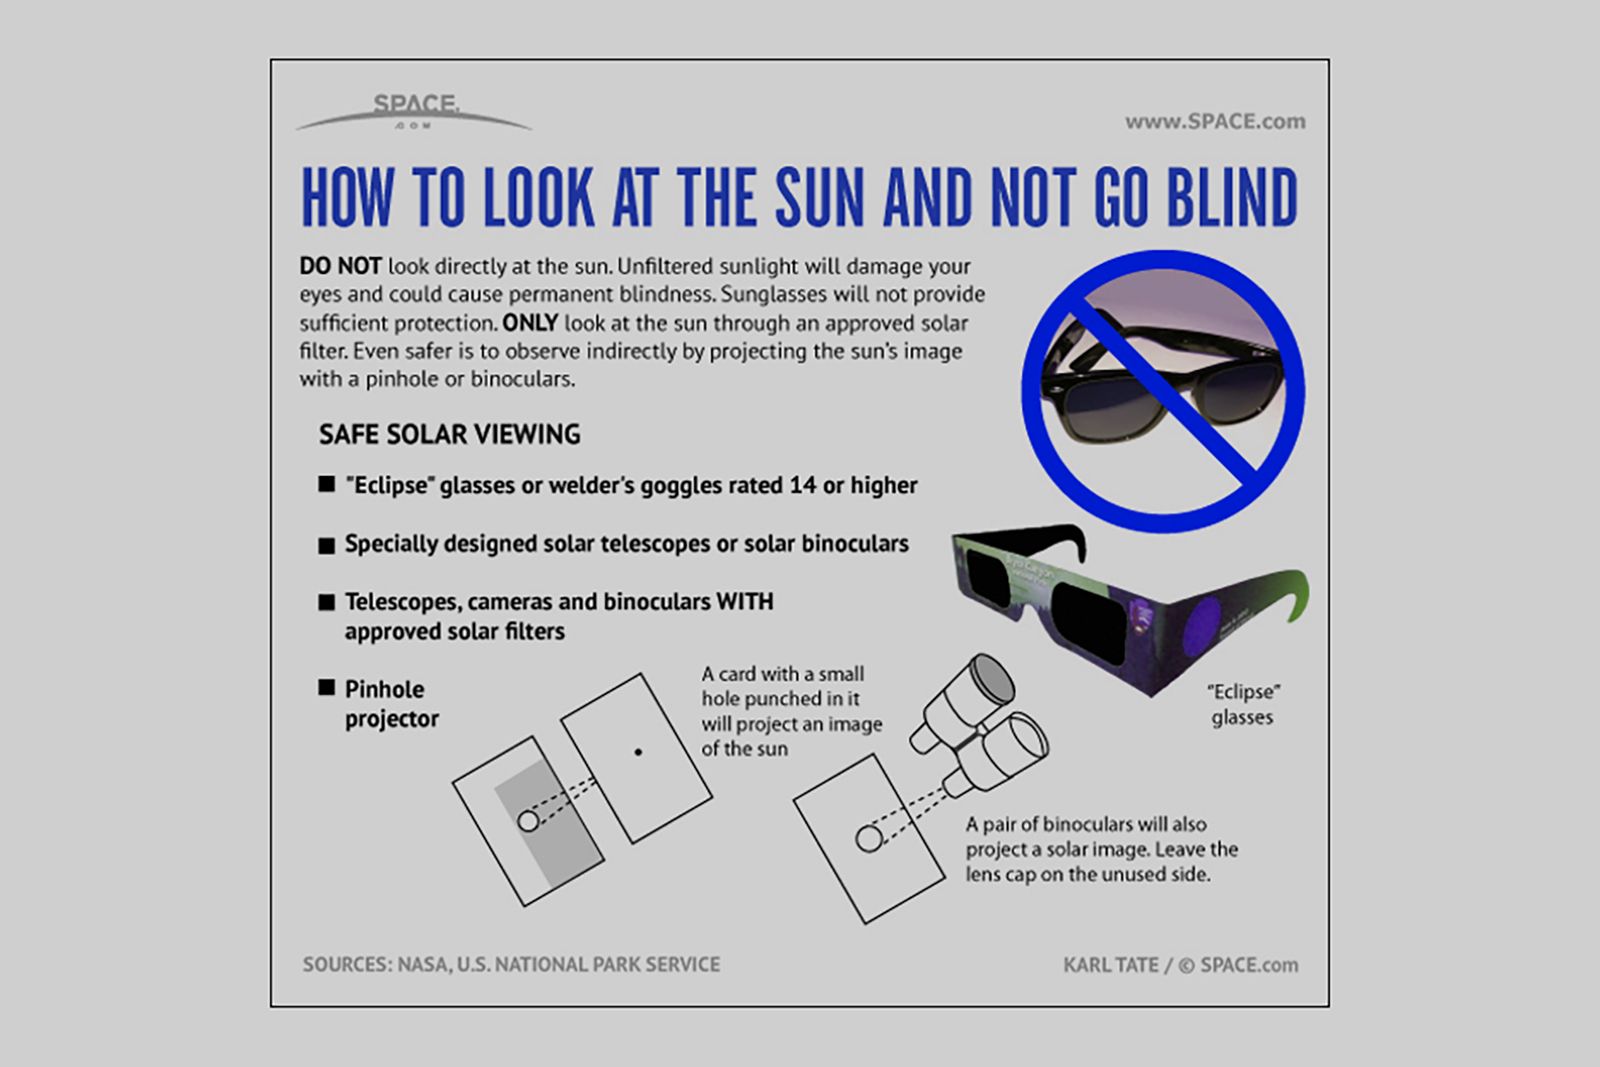 Solar eclipse 2017 When is it and how to watch online or in person image 3